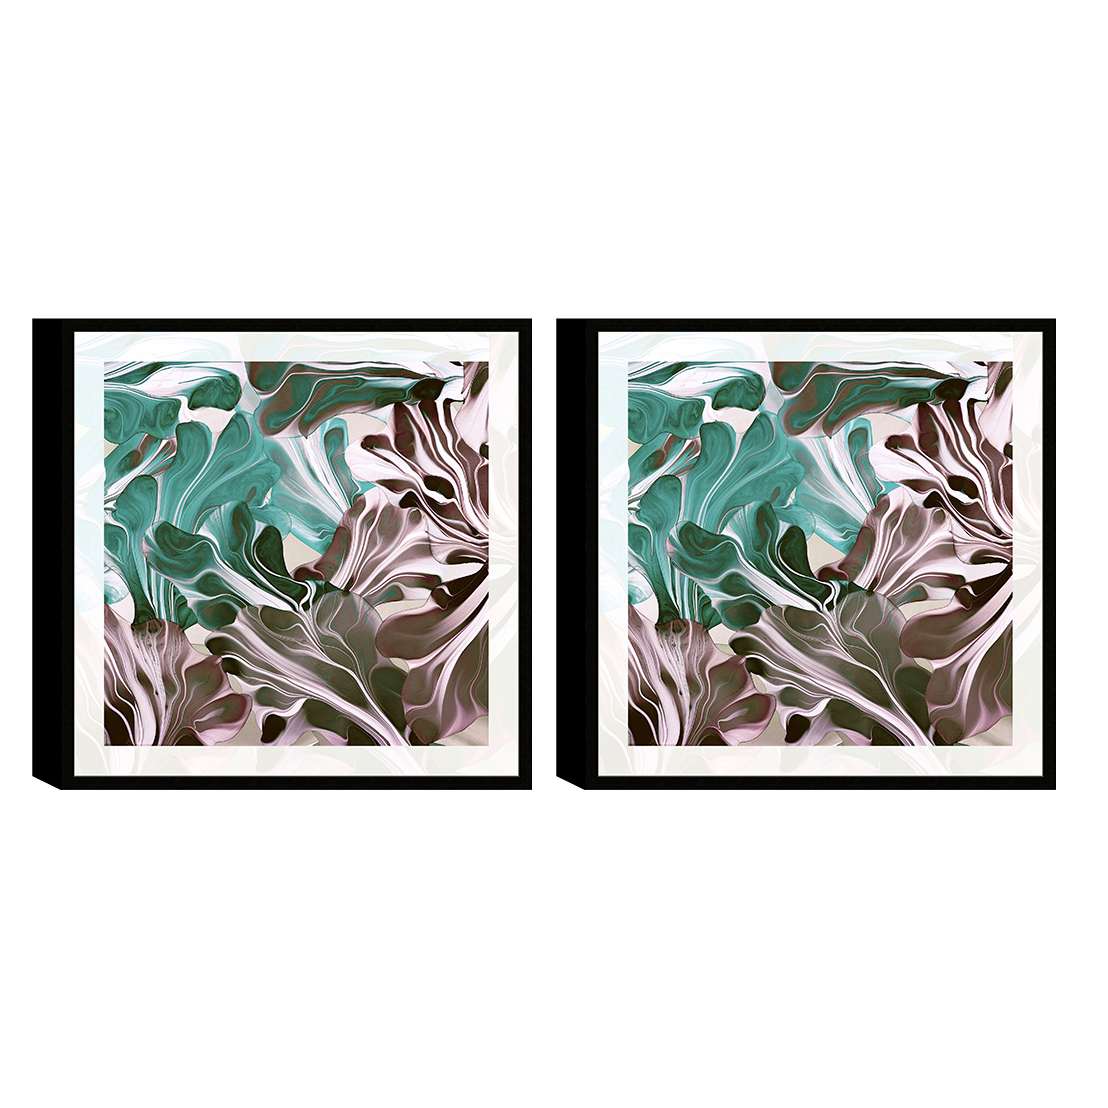 Cavalli 2 Piece Framed Canvas Painting 23x46 Inches